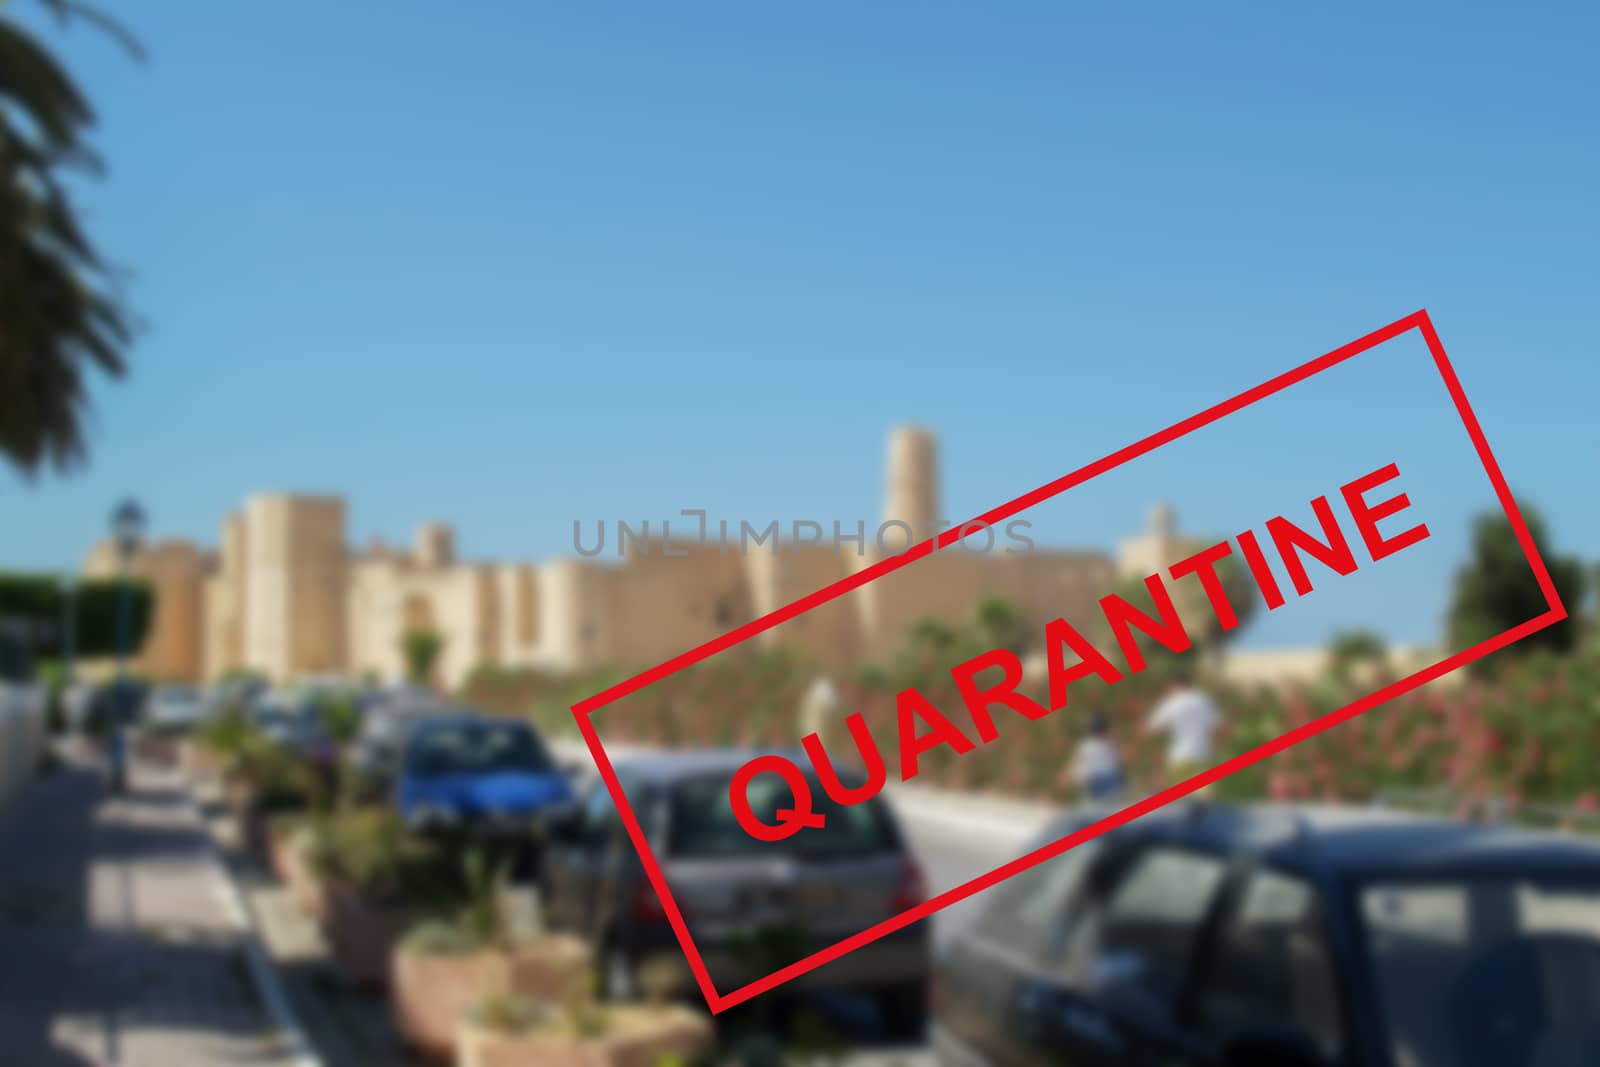 Text of the quarantine against the background of urban architecture in Tunisia, tourist attractions are closed due to a new outbreak of coronavirus. The concept of the collapse of the tourism industry.